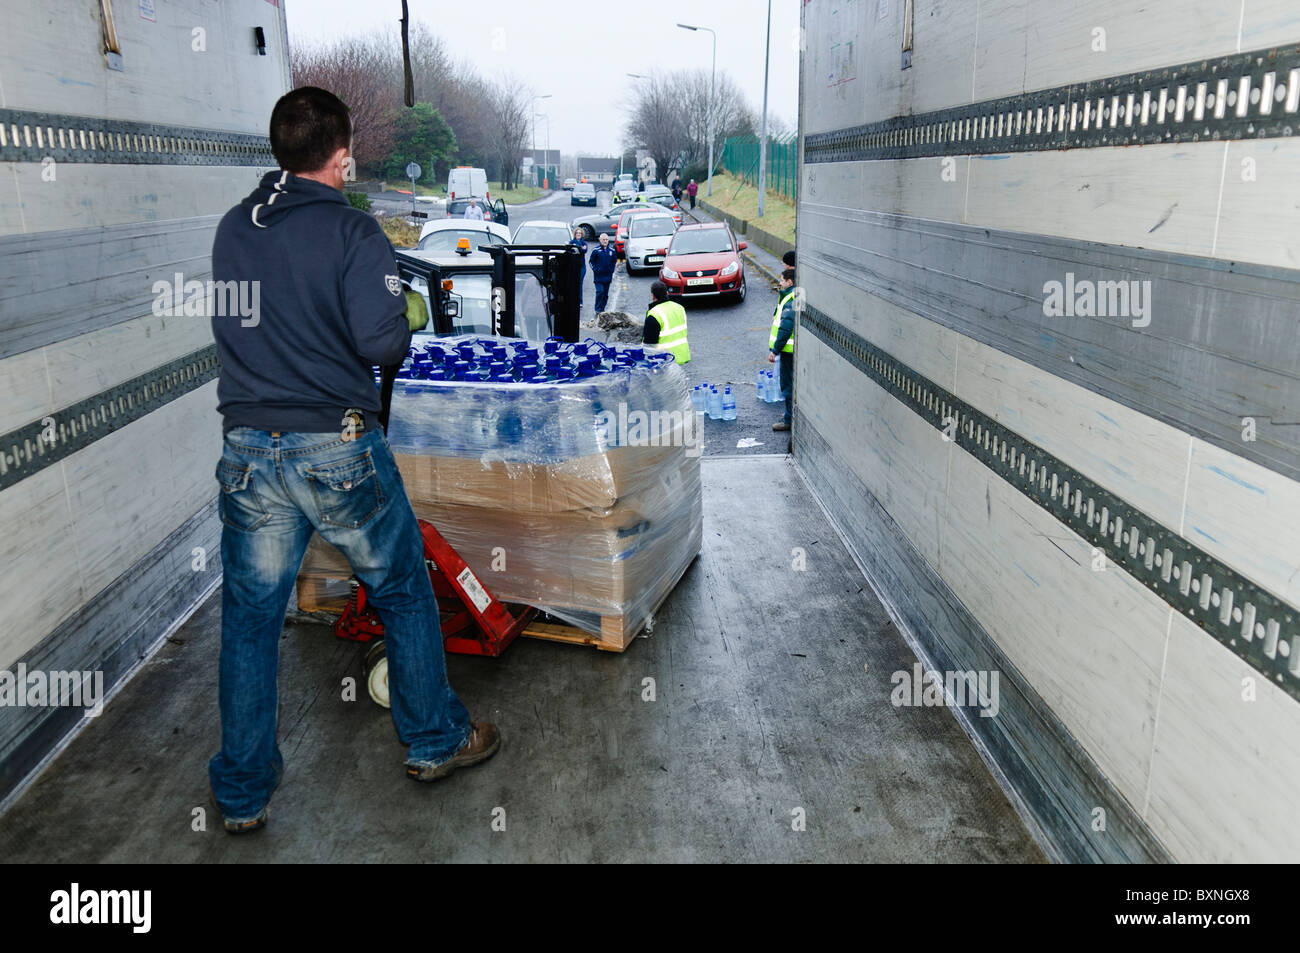 Offloading bottled water from a lorry using a forklift Stock Photo